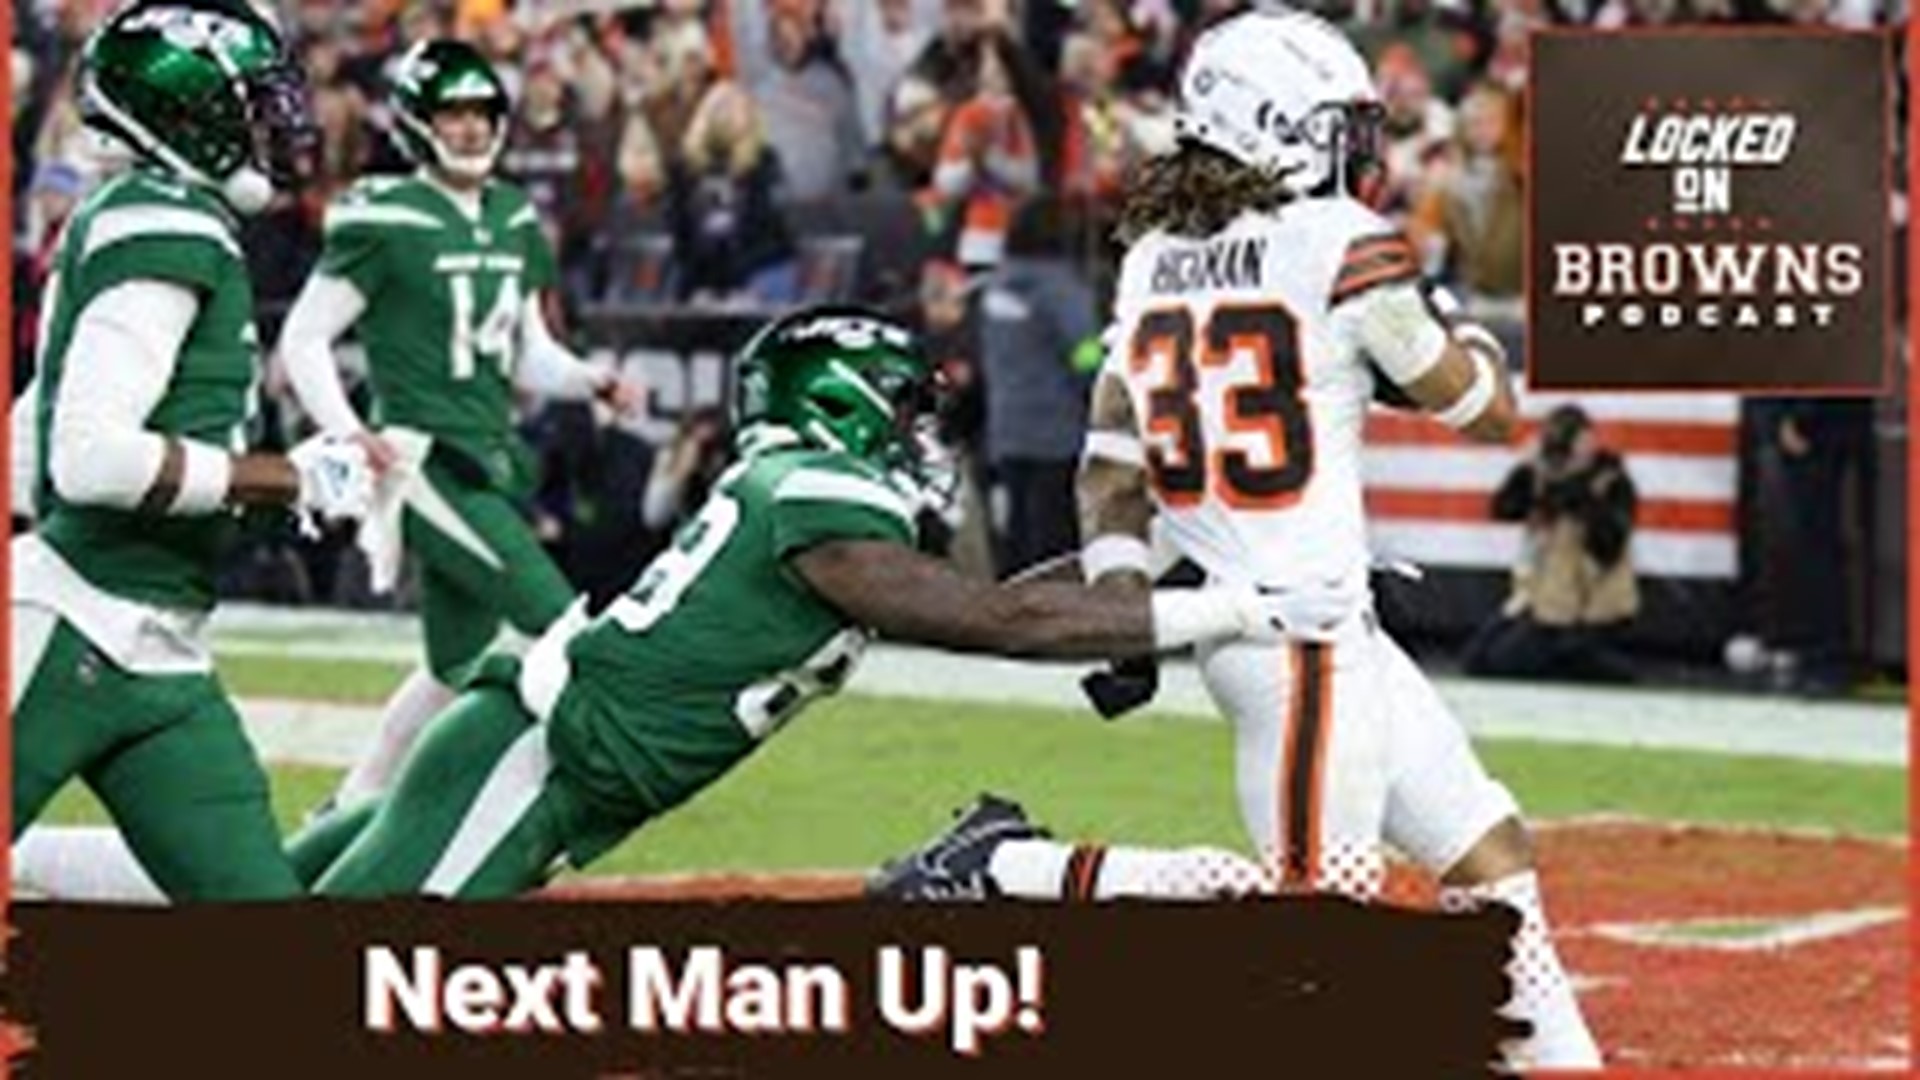 The OBR's Pete Smith joins to talk the Cleveland Browns playoff clinching win over the New York Jets.